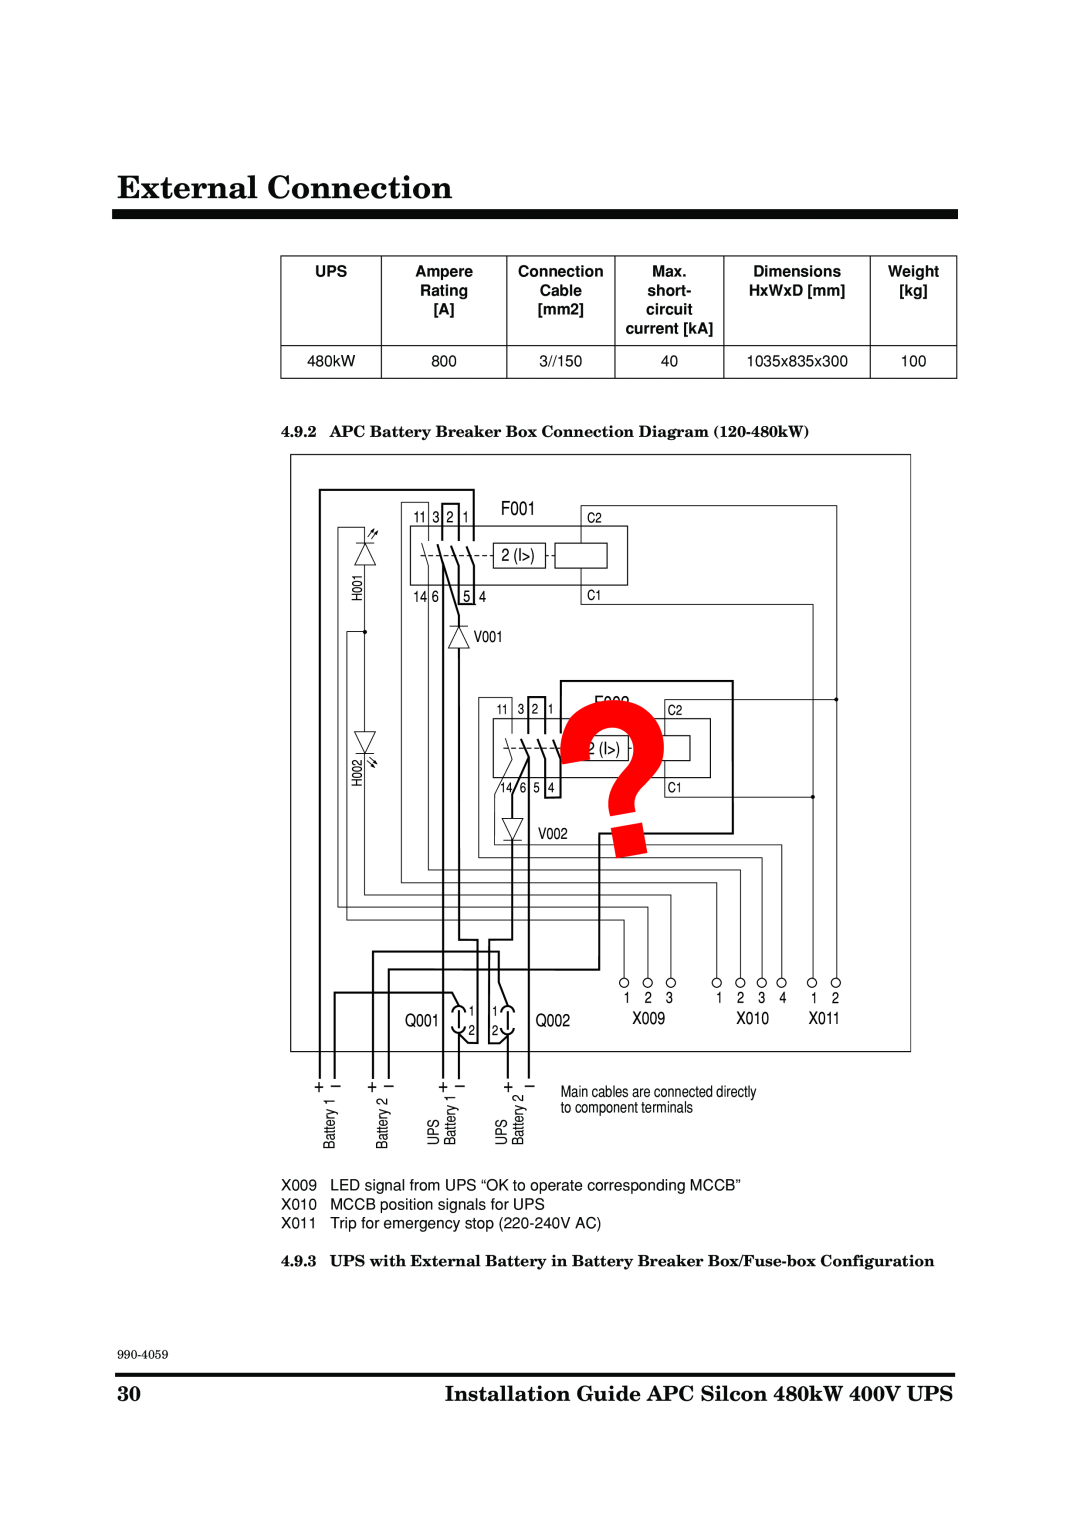 American Power Conversion 480kW 400V manual APC Battery Breaker Box Connection Diagram 120-480kW, External Connection 